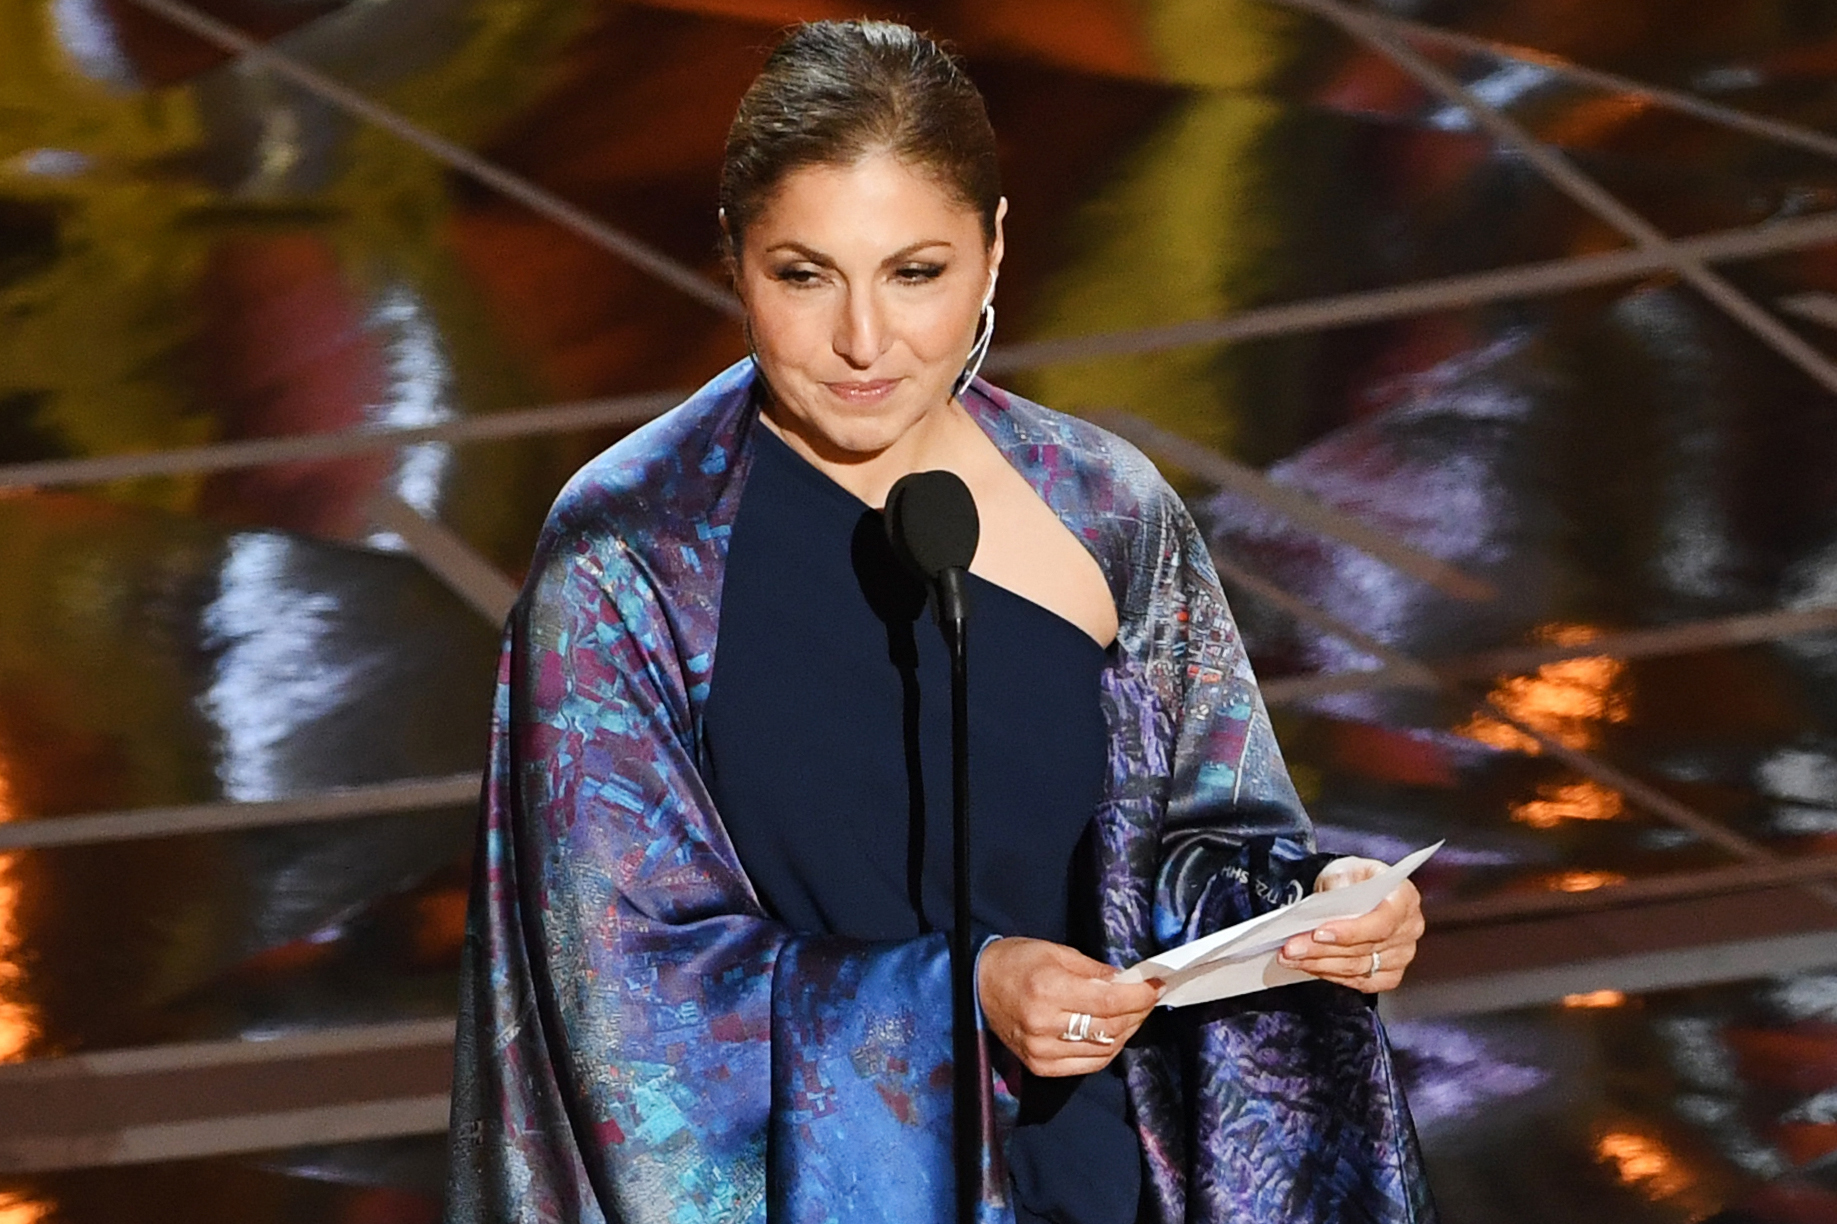 Engineer/astronaut Anousheh Ansari accepts Best Foreign Language Film for <i>The Salesman</i> on behalf of director Asghar Farhadi during the 89th Annual Academy Awards, on Feb. 26, 2017 in Hollywood, Calif. (Kevin Winter—Getty Images)